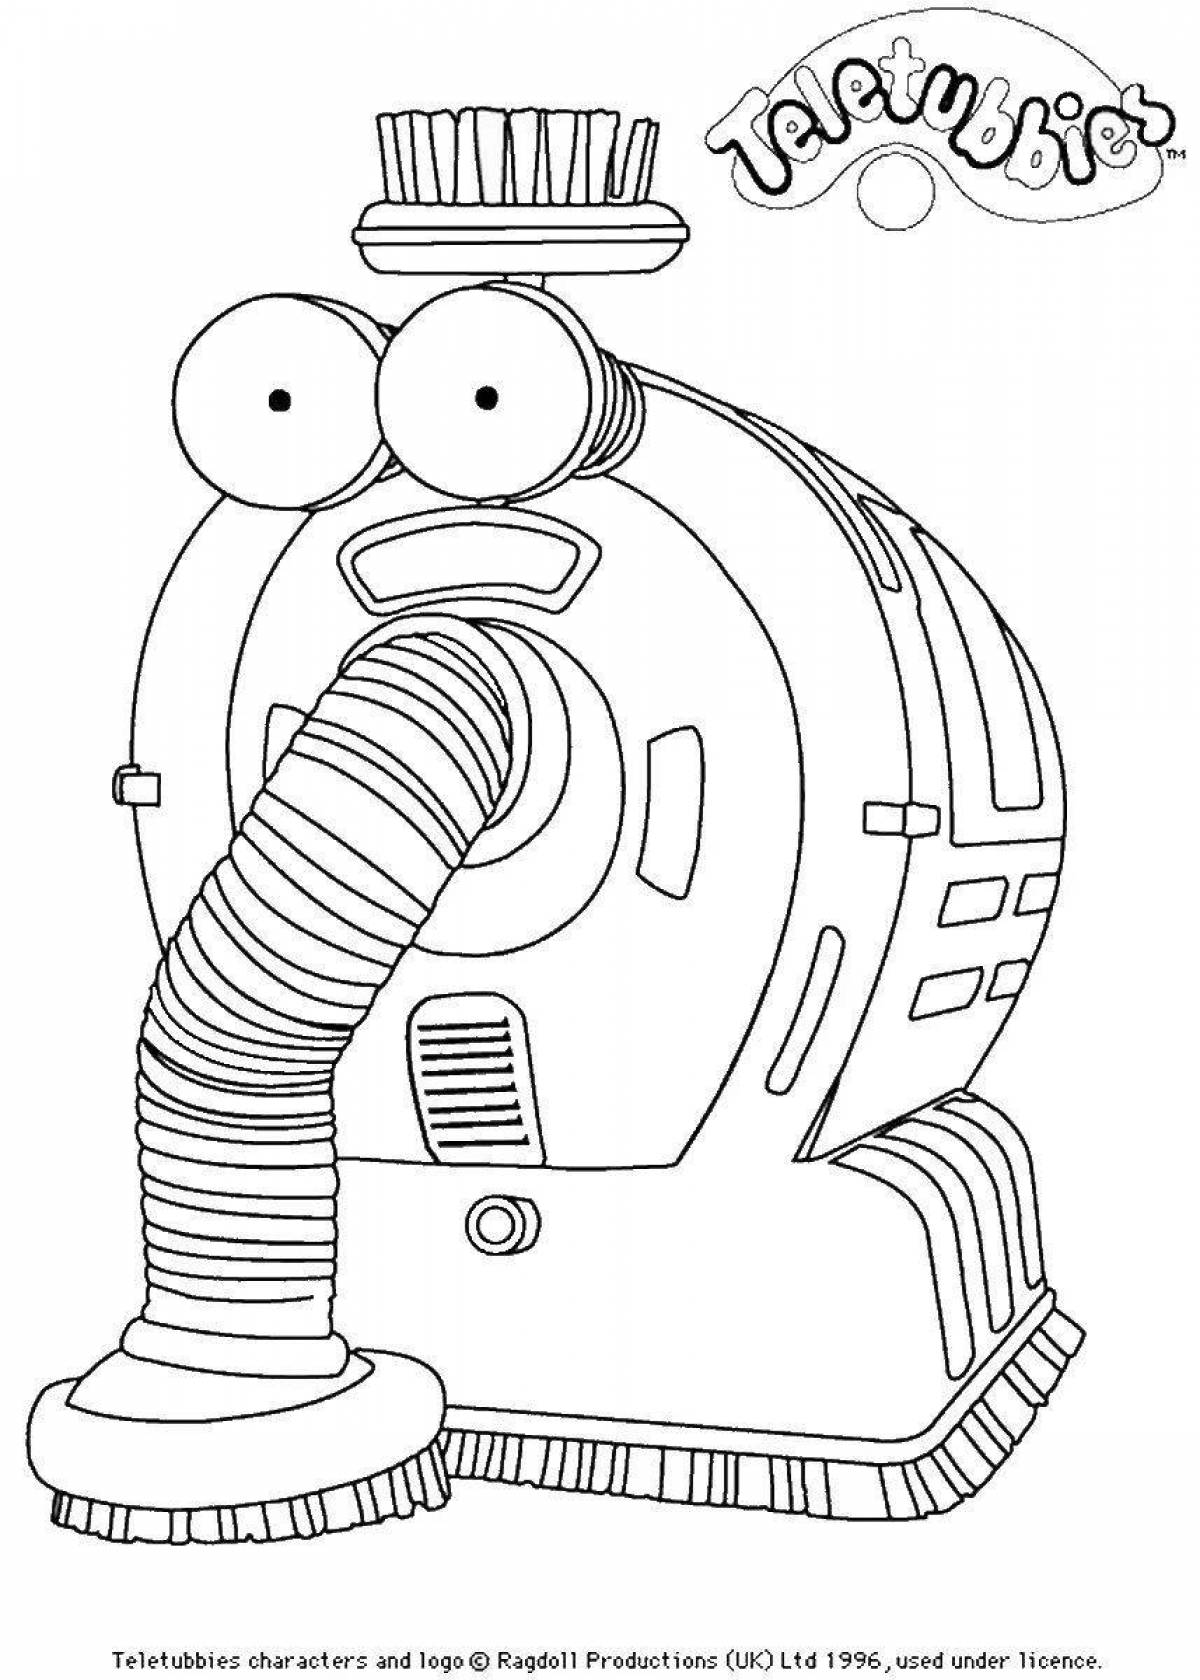 Adorable Robot Vacuum Cleaner Coloring Page